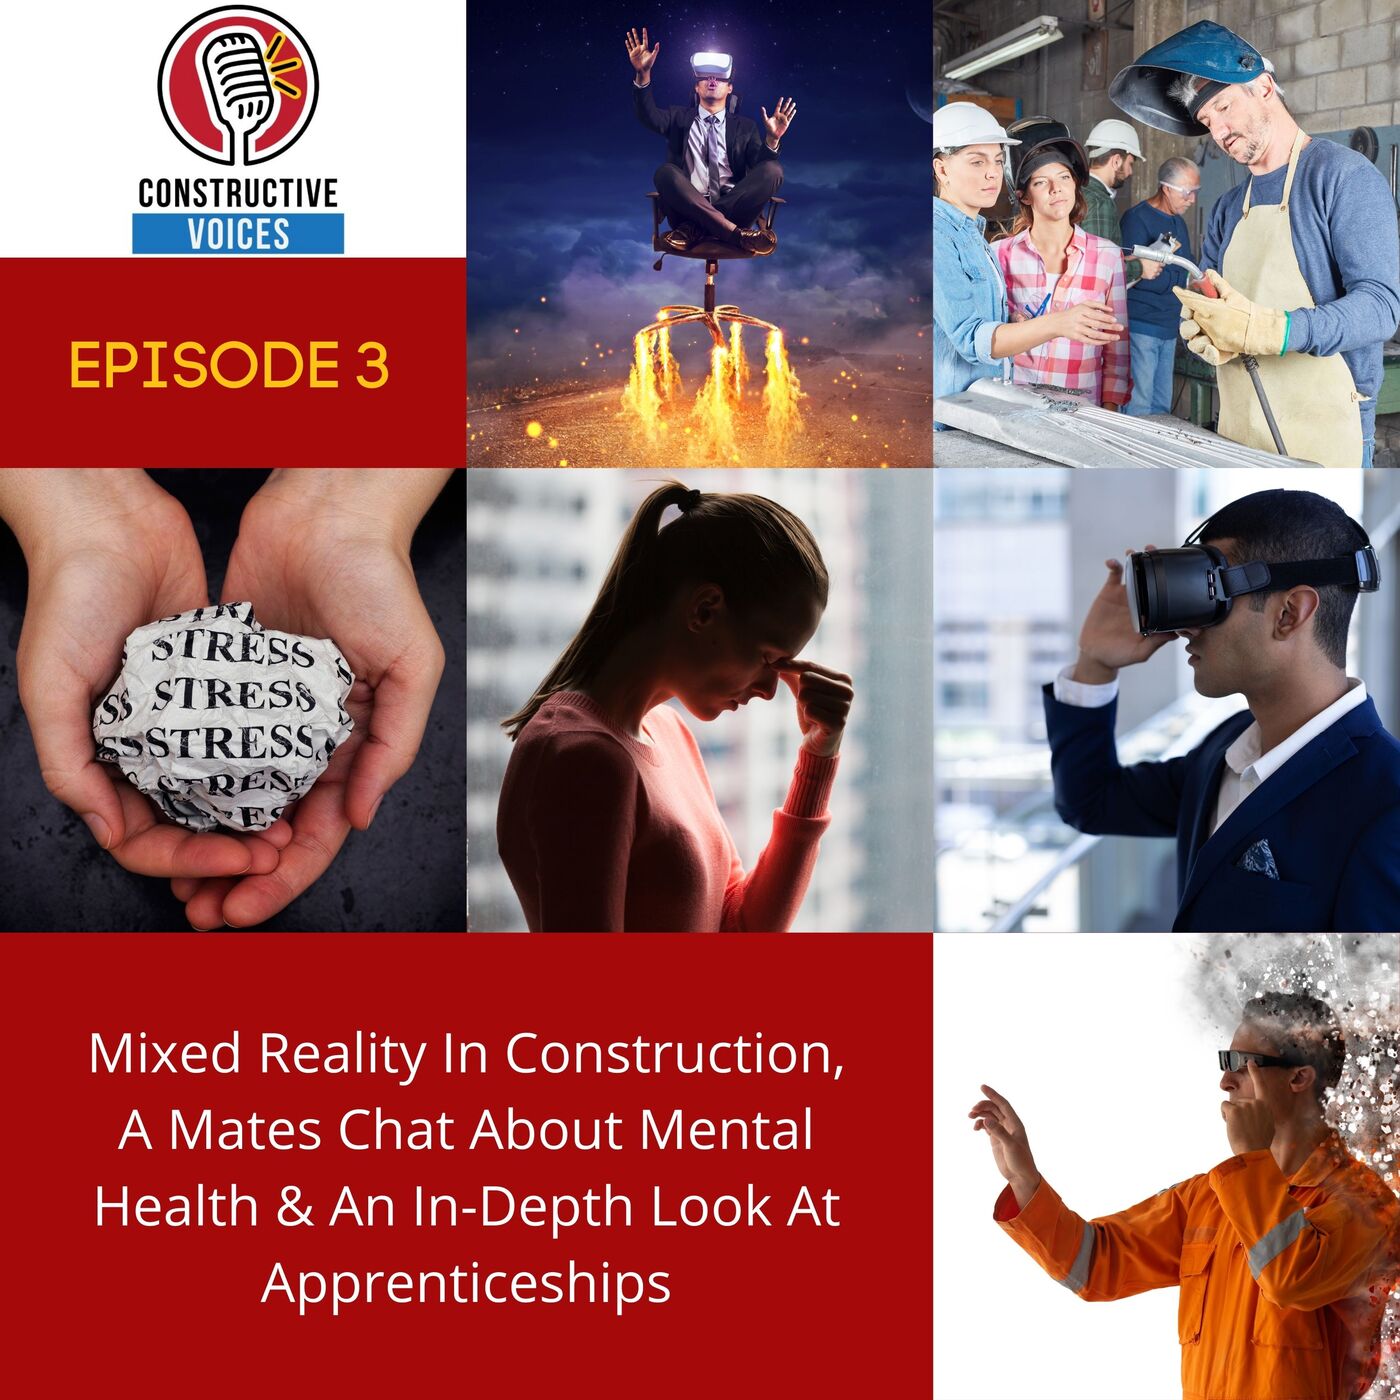 Mixed Reality In Construction, A Mates Chat About Mental Health & An In-Depth Look At Apprenticeships